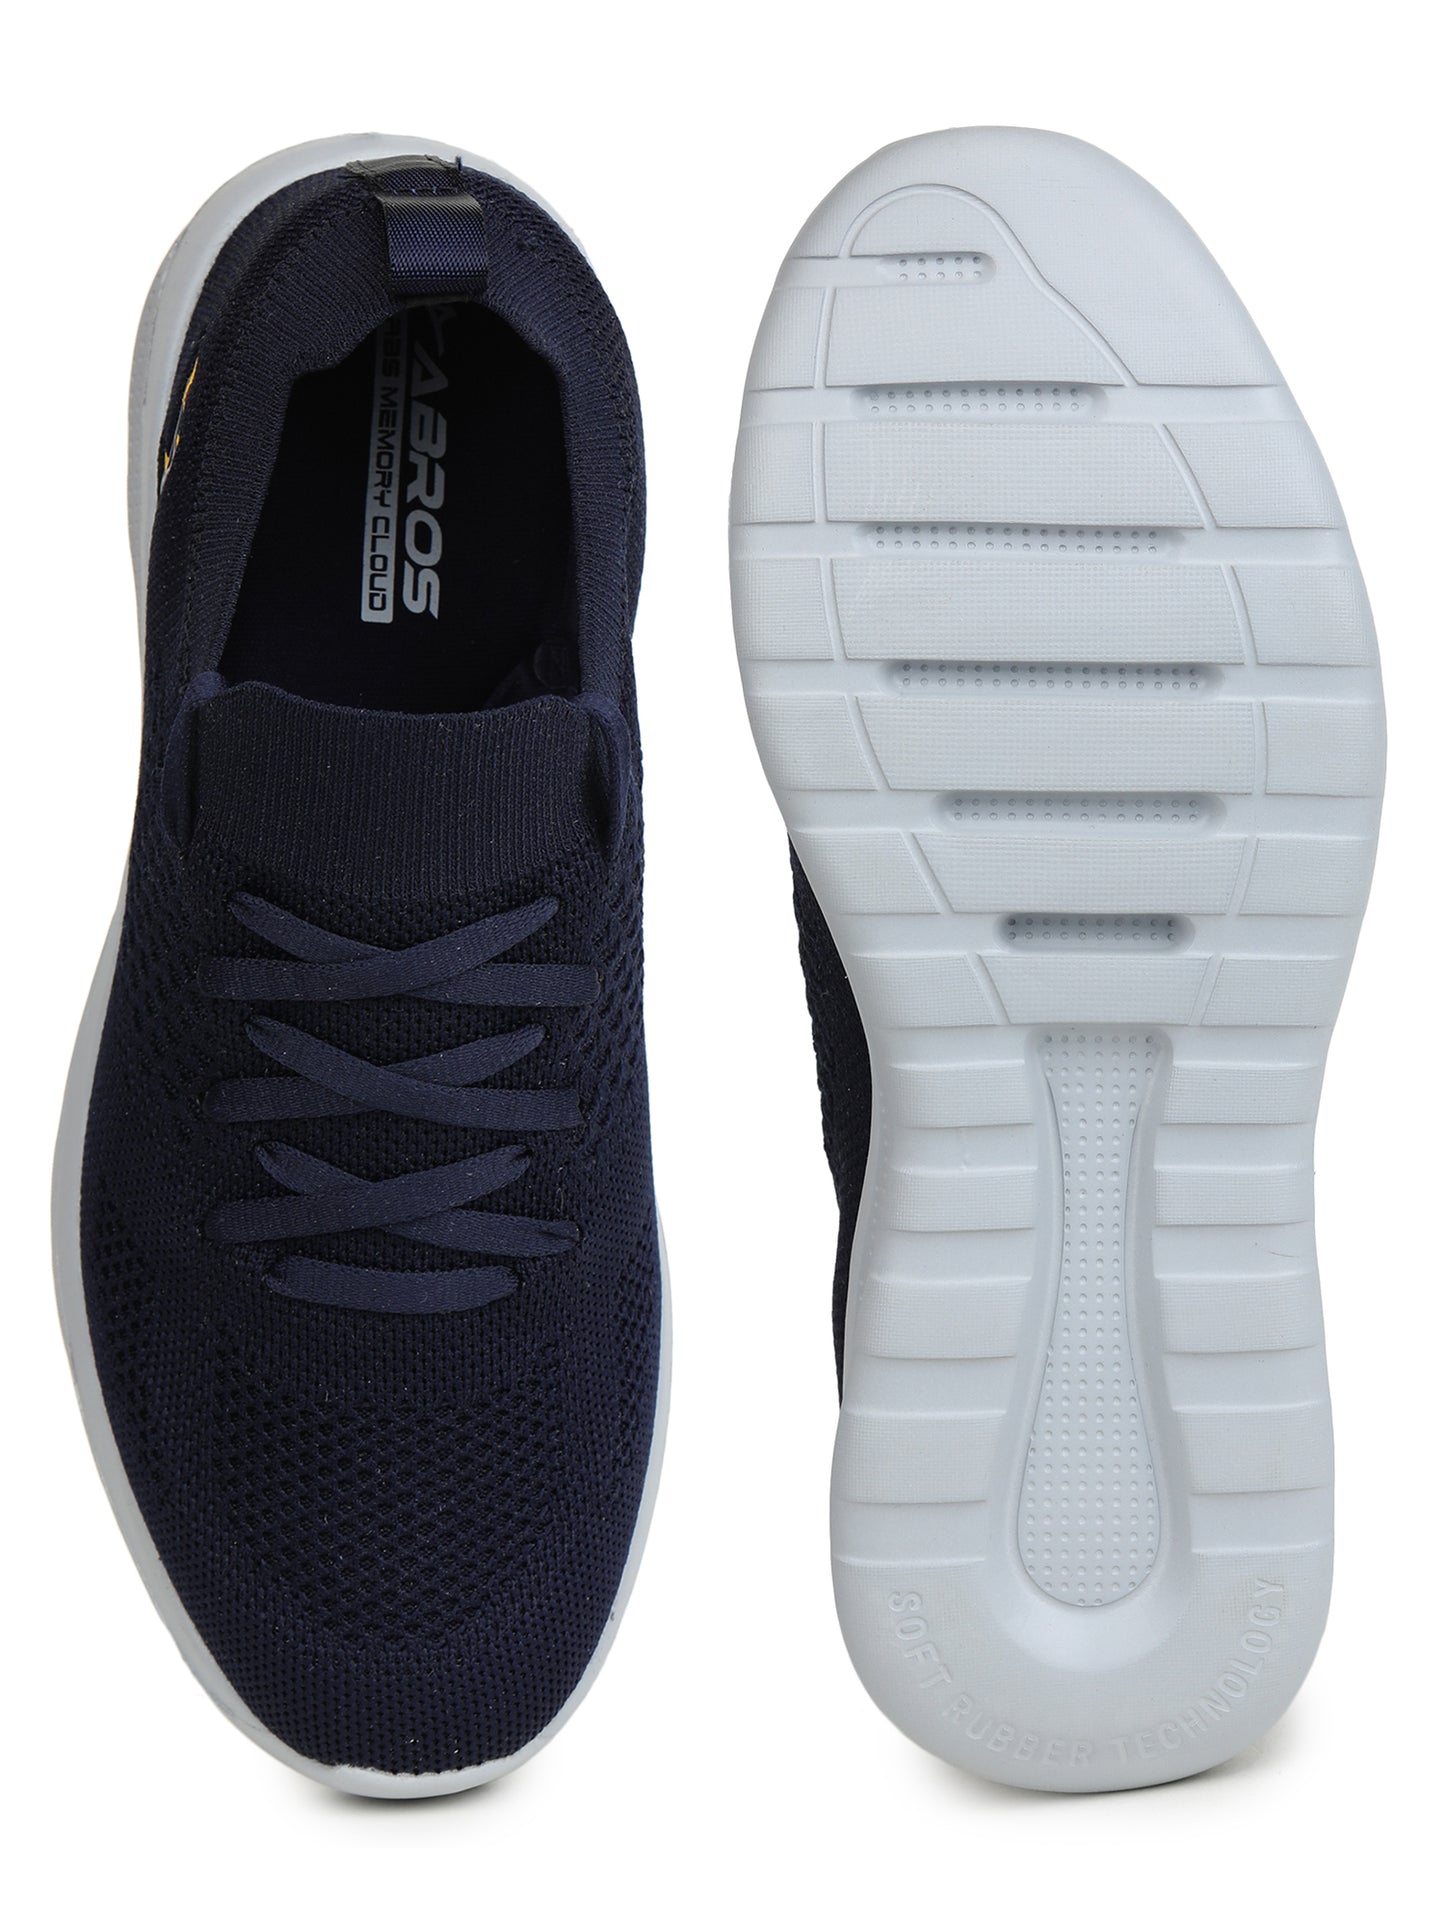 ABROS JAVIER SPORT-SHOES For MEN'S